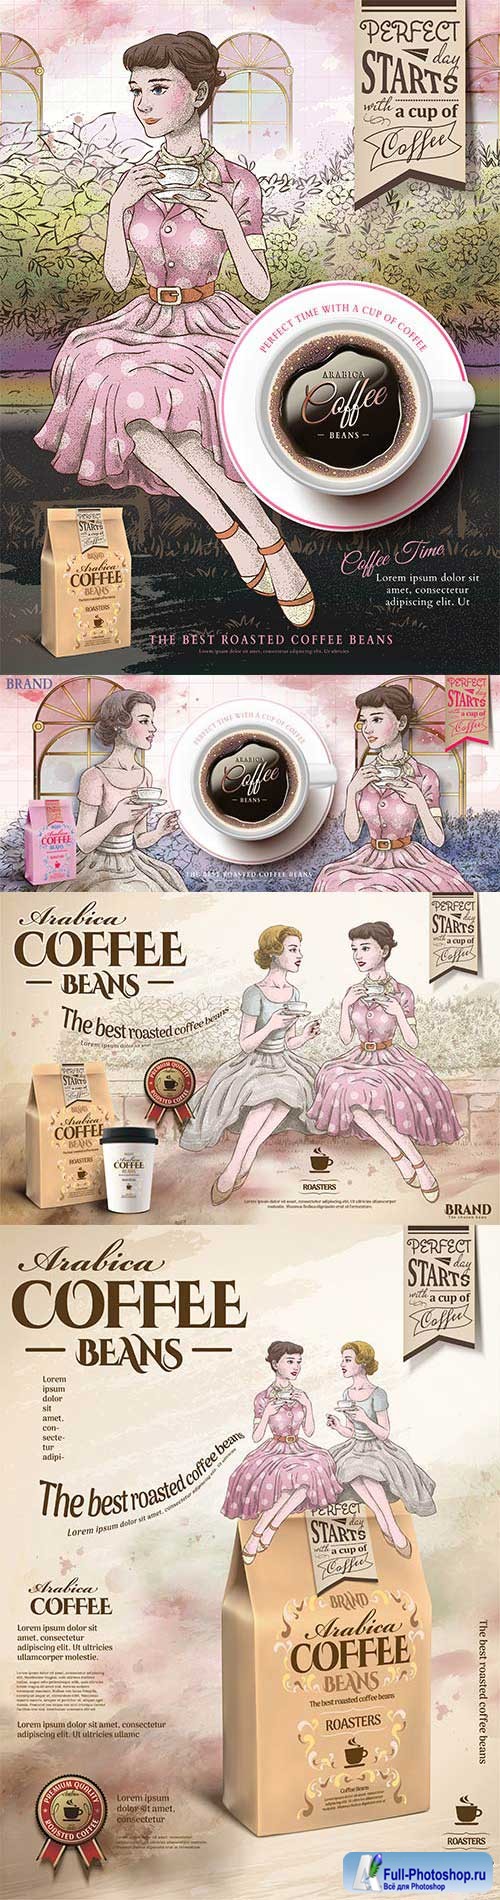 Retro coffee beans ads in 3d vector illustration